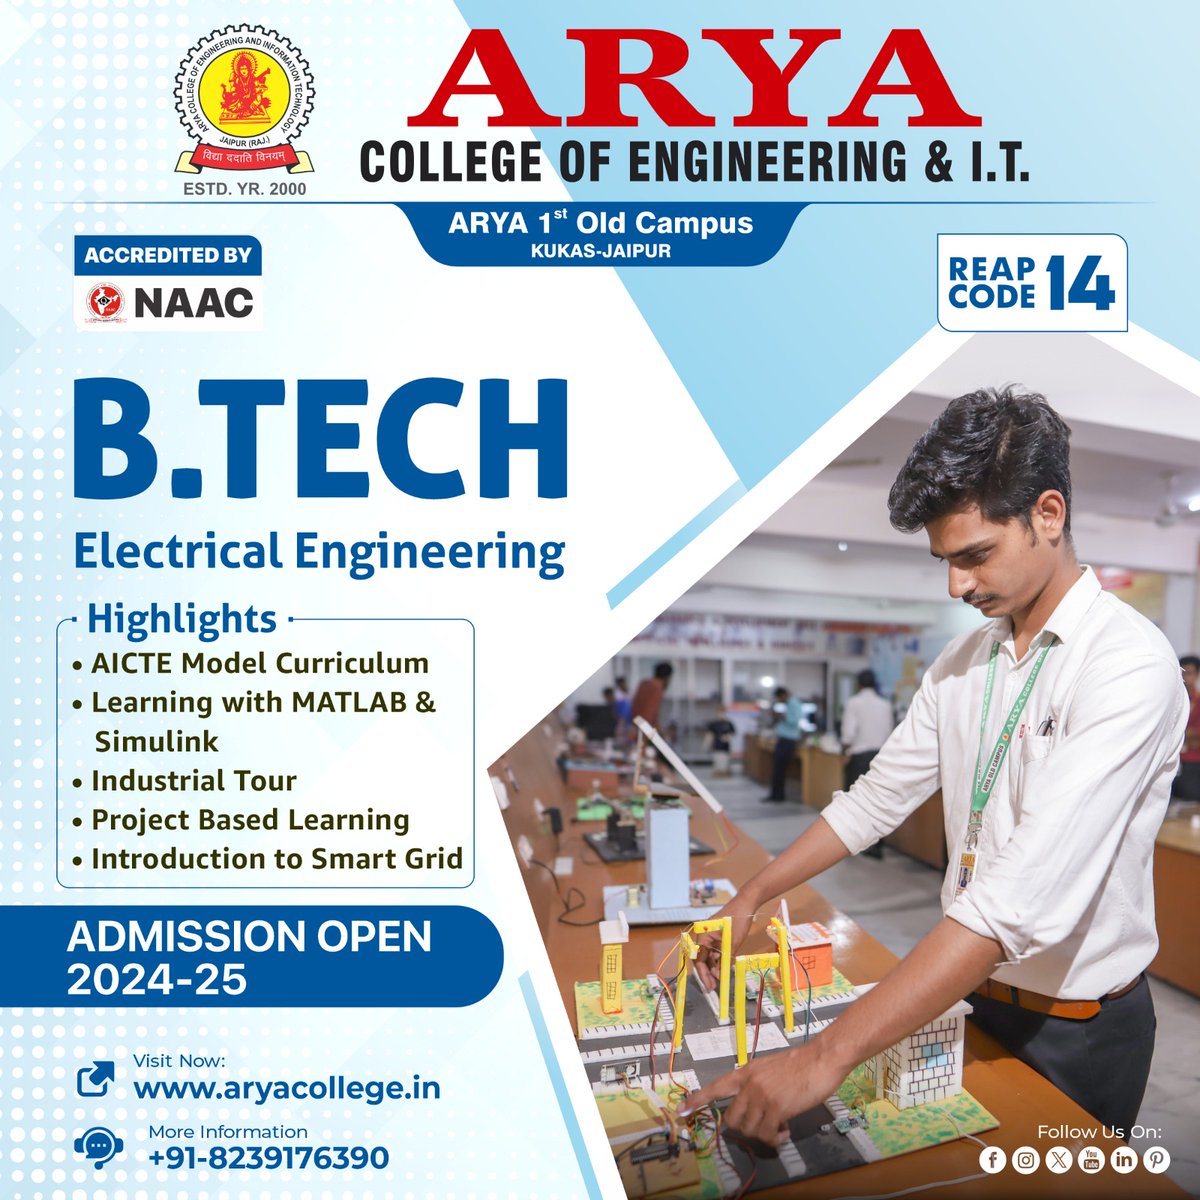 Unlock your potential in #ElectricalEngineering with our #BTech program. Immerse yourself in the AICTE Model Curriculum, harness the power of MATLAB & Simulink, & explore the industry through immersive tours. Join us to engineer a brighter tomorrow!

#AryaCollege #AdmissionsOpen